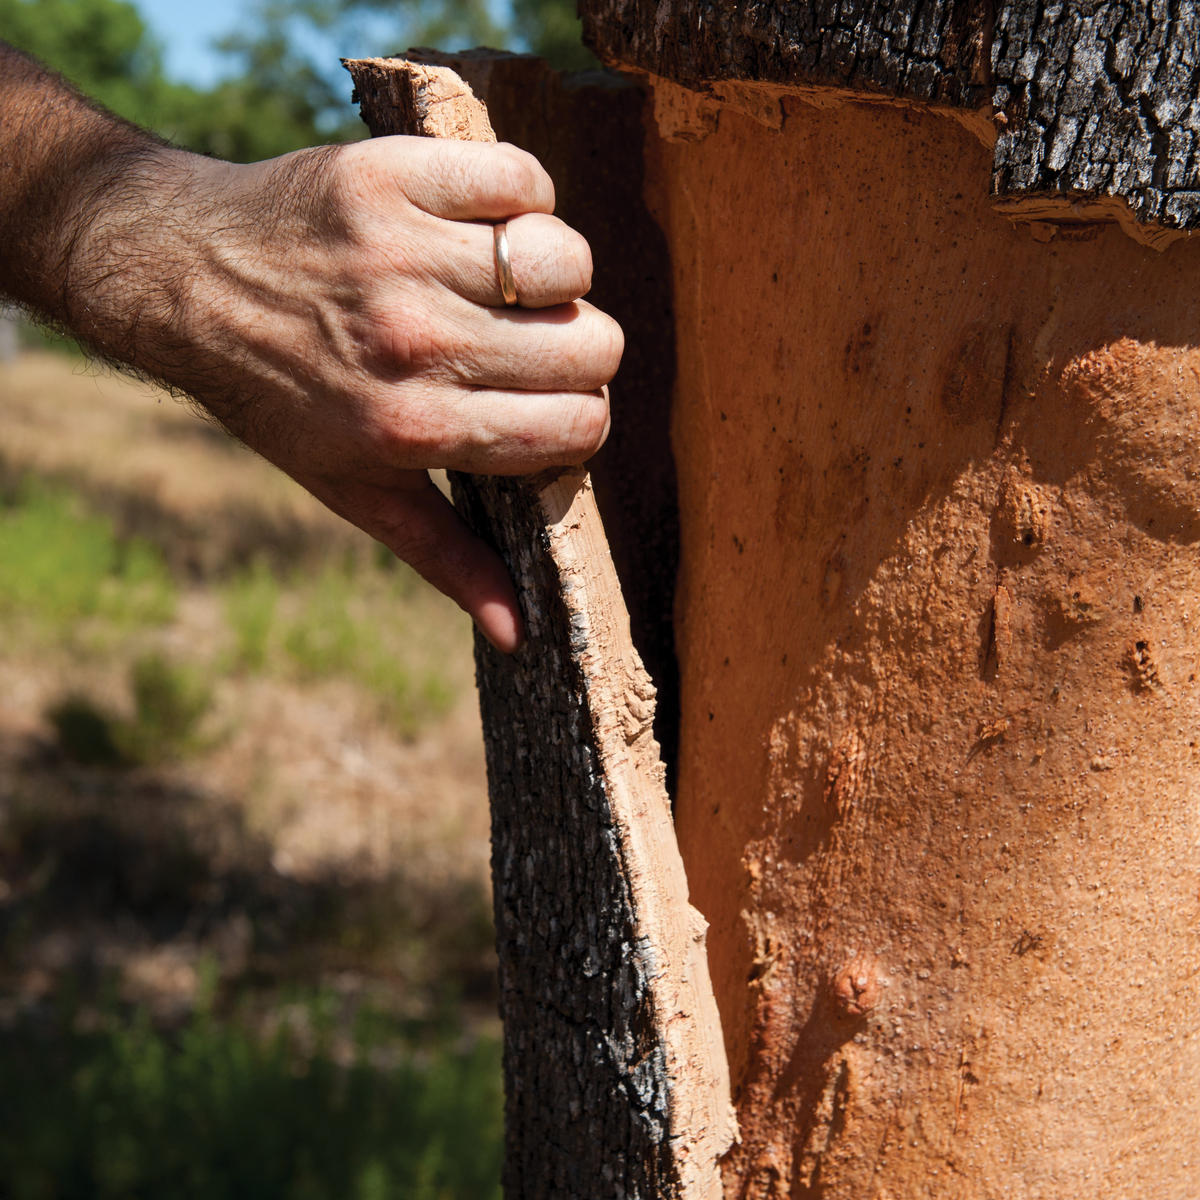 A worker strips a layer of bark from a cork oak tree.